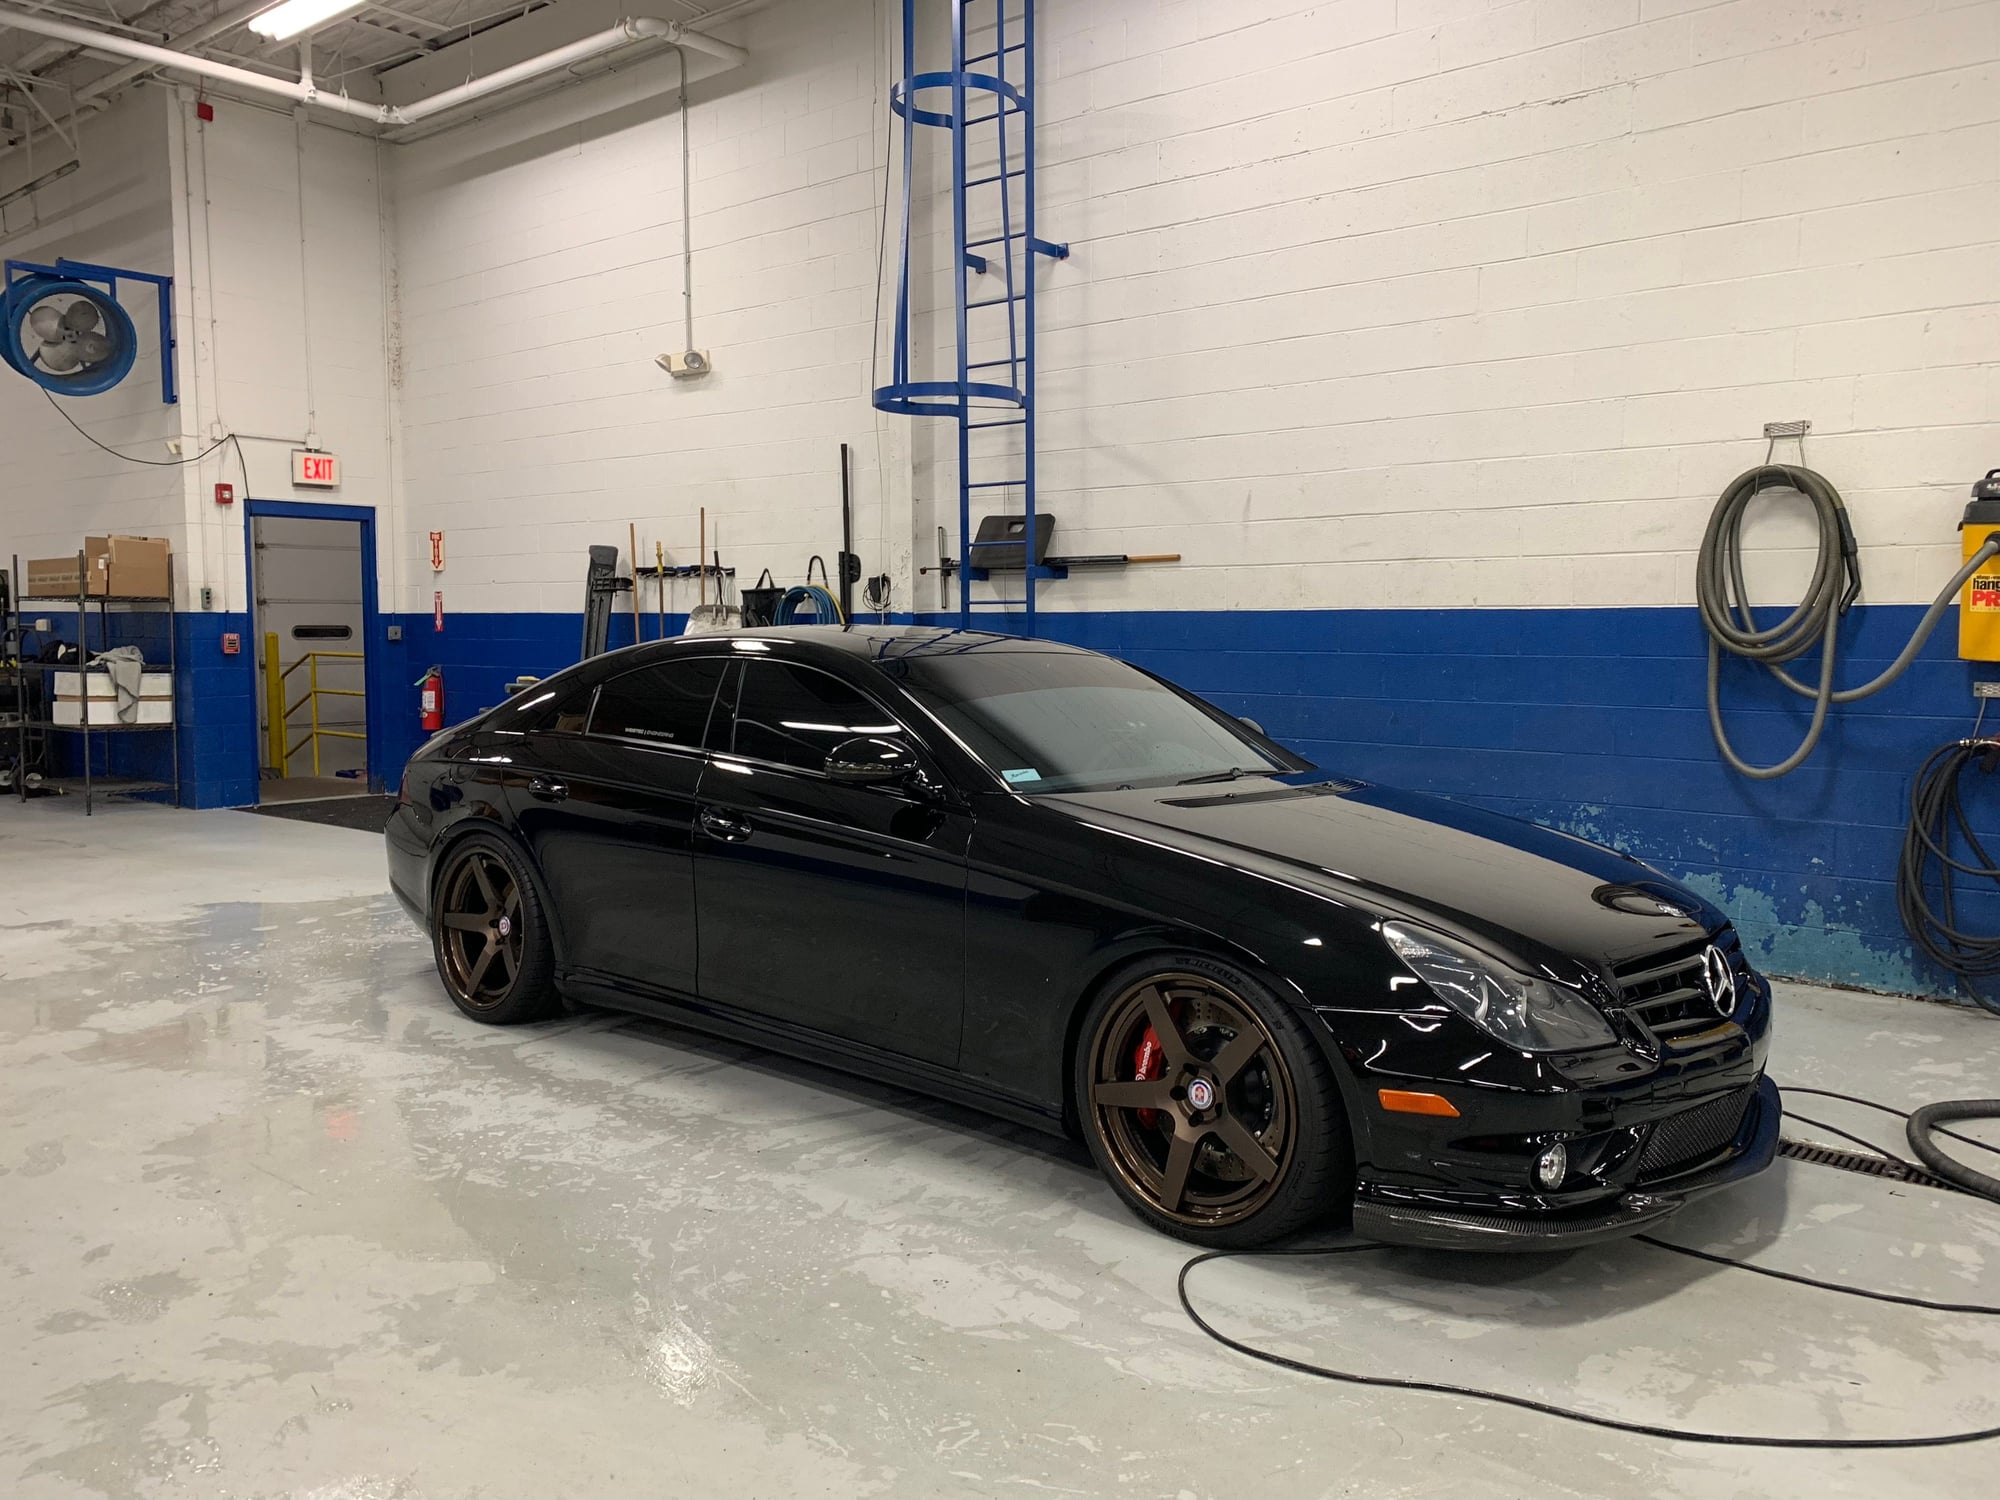 2007 Mercedes-Benz CLS63 AMG - WEISTEC BUILT STAGE 3 CLS63 - Used - VIN Call for details - 70,000 Miles - Black - Chicago, IL 60089, United States